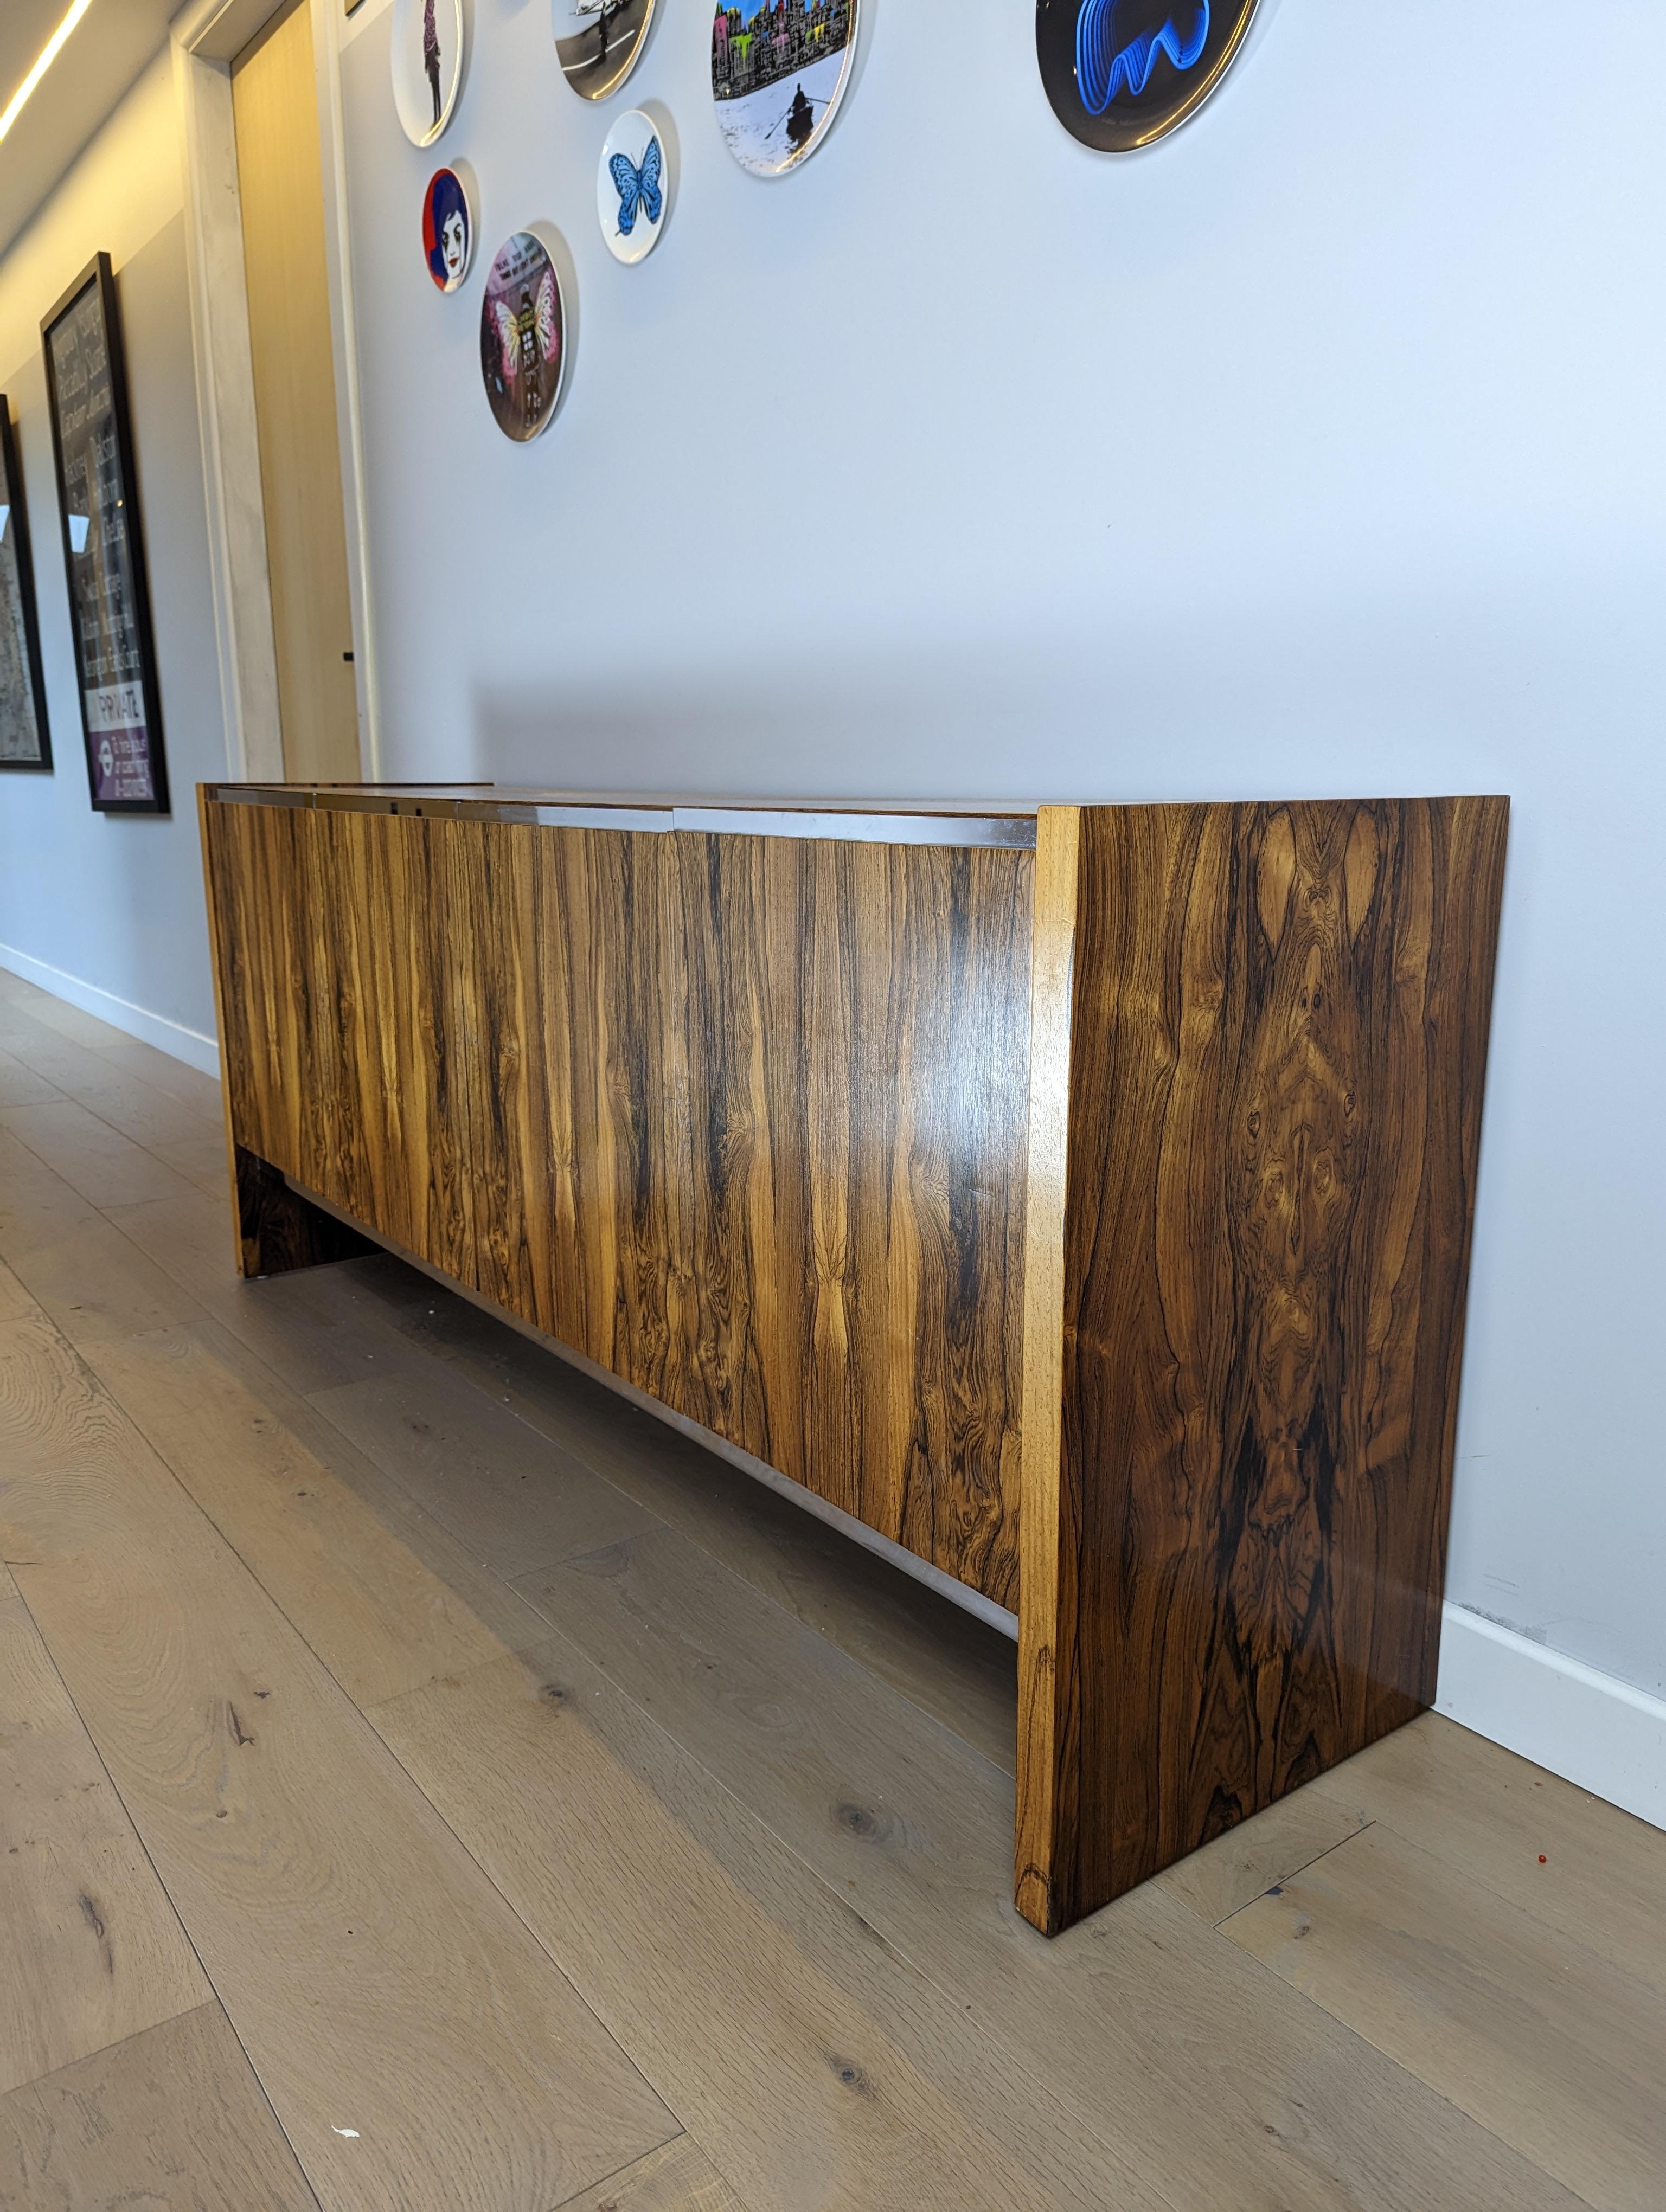 An absolutely stunning vintage sideboard in rosewood with chrome accents, made by Merrow Associates. This was designed by Richard Young; it dates from the 1960-70’s.

The quality is outstanding, this has gorgeous rosewood grain patterns throughout